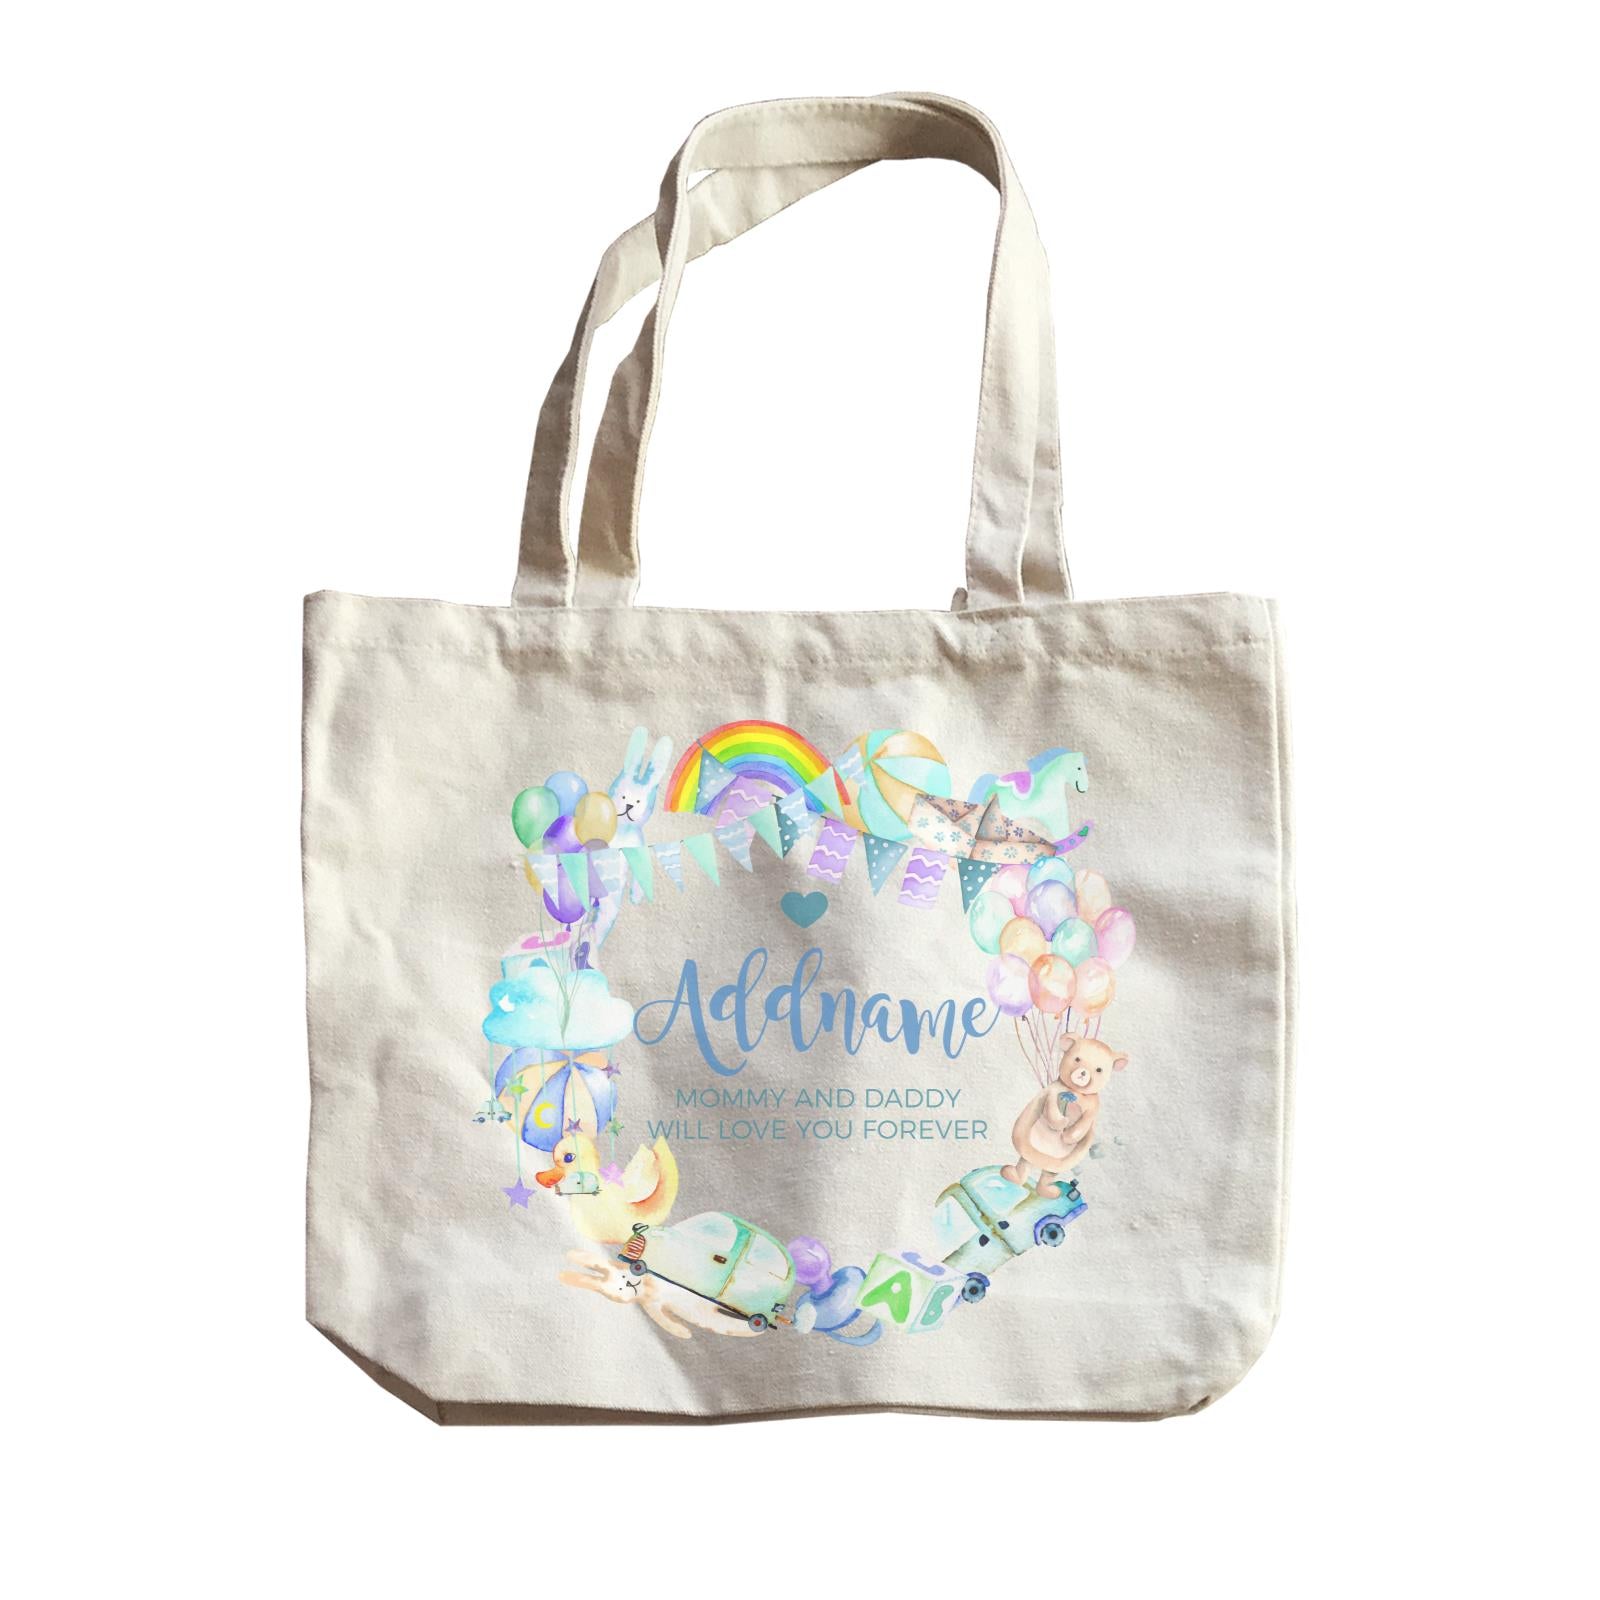 Watercolour Magical Boyish Creatures and Elements Personalizable with Name and Text Canvas Bag